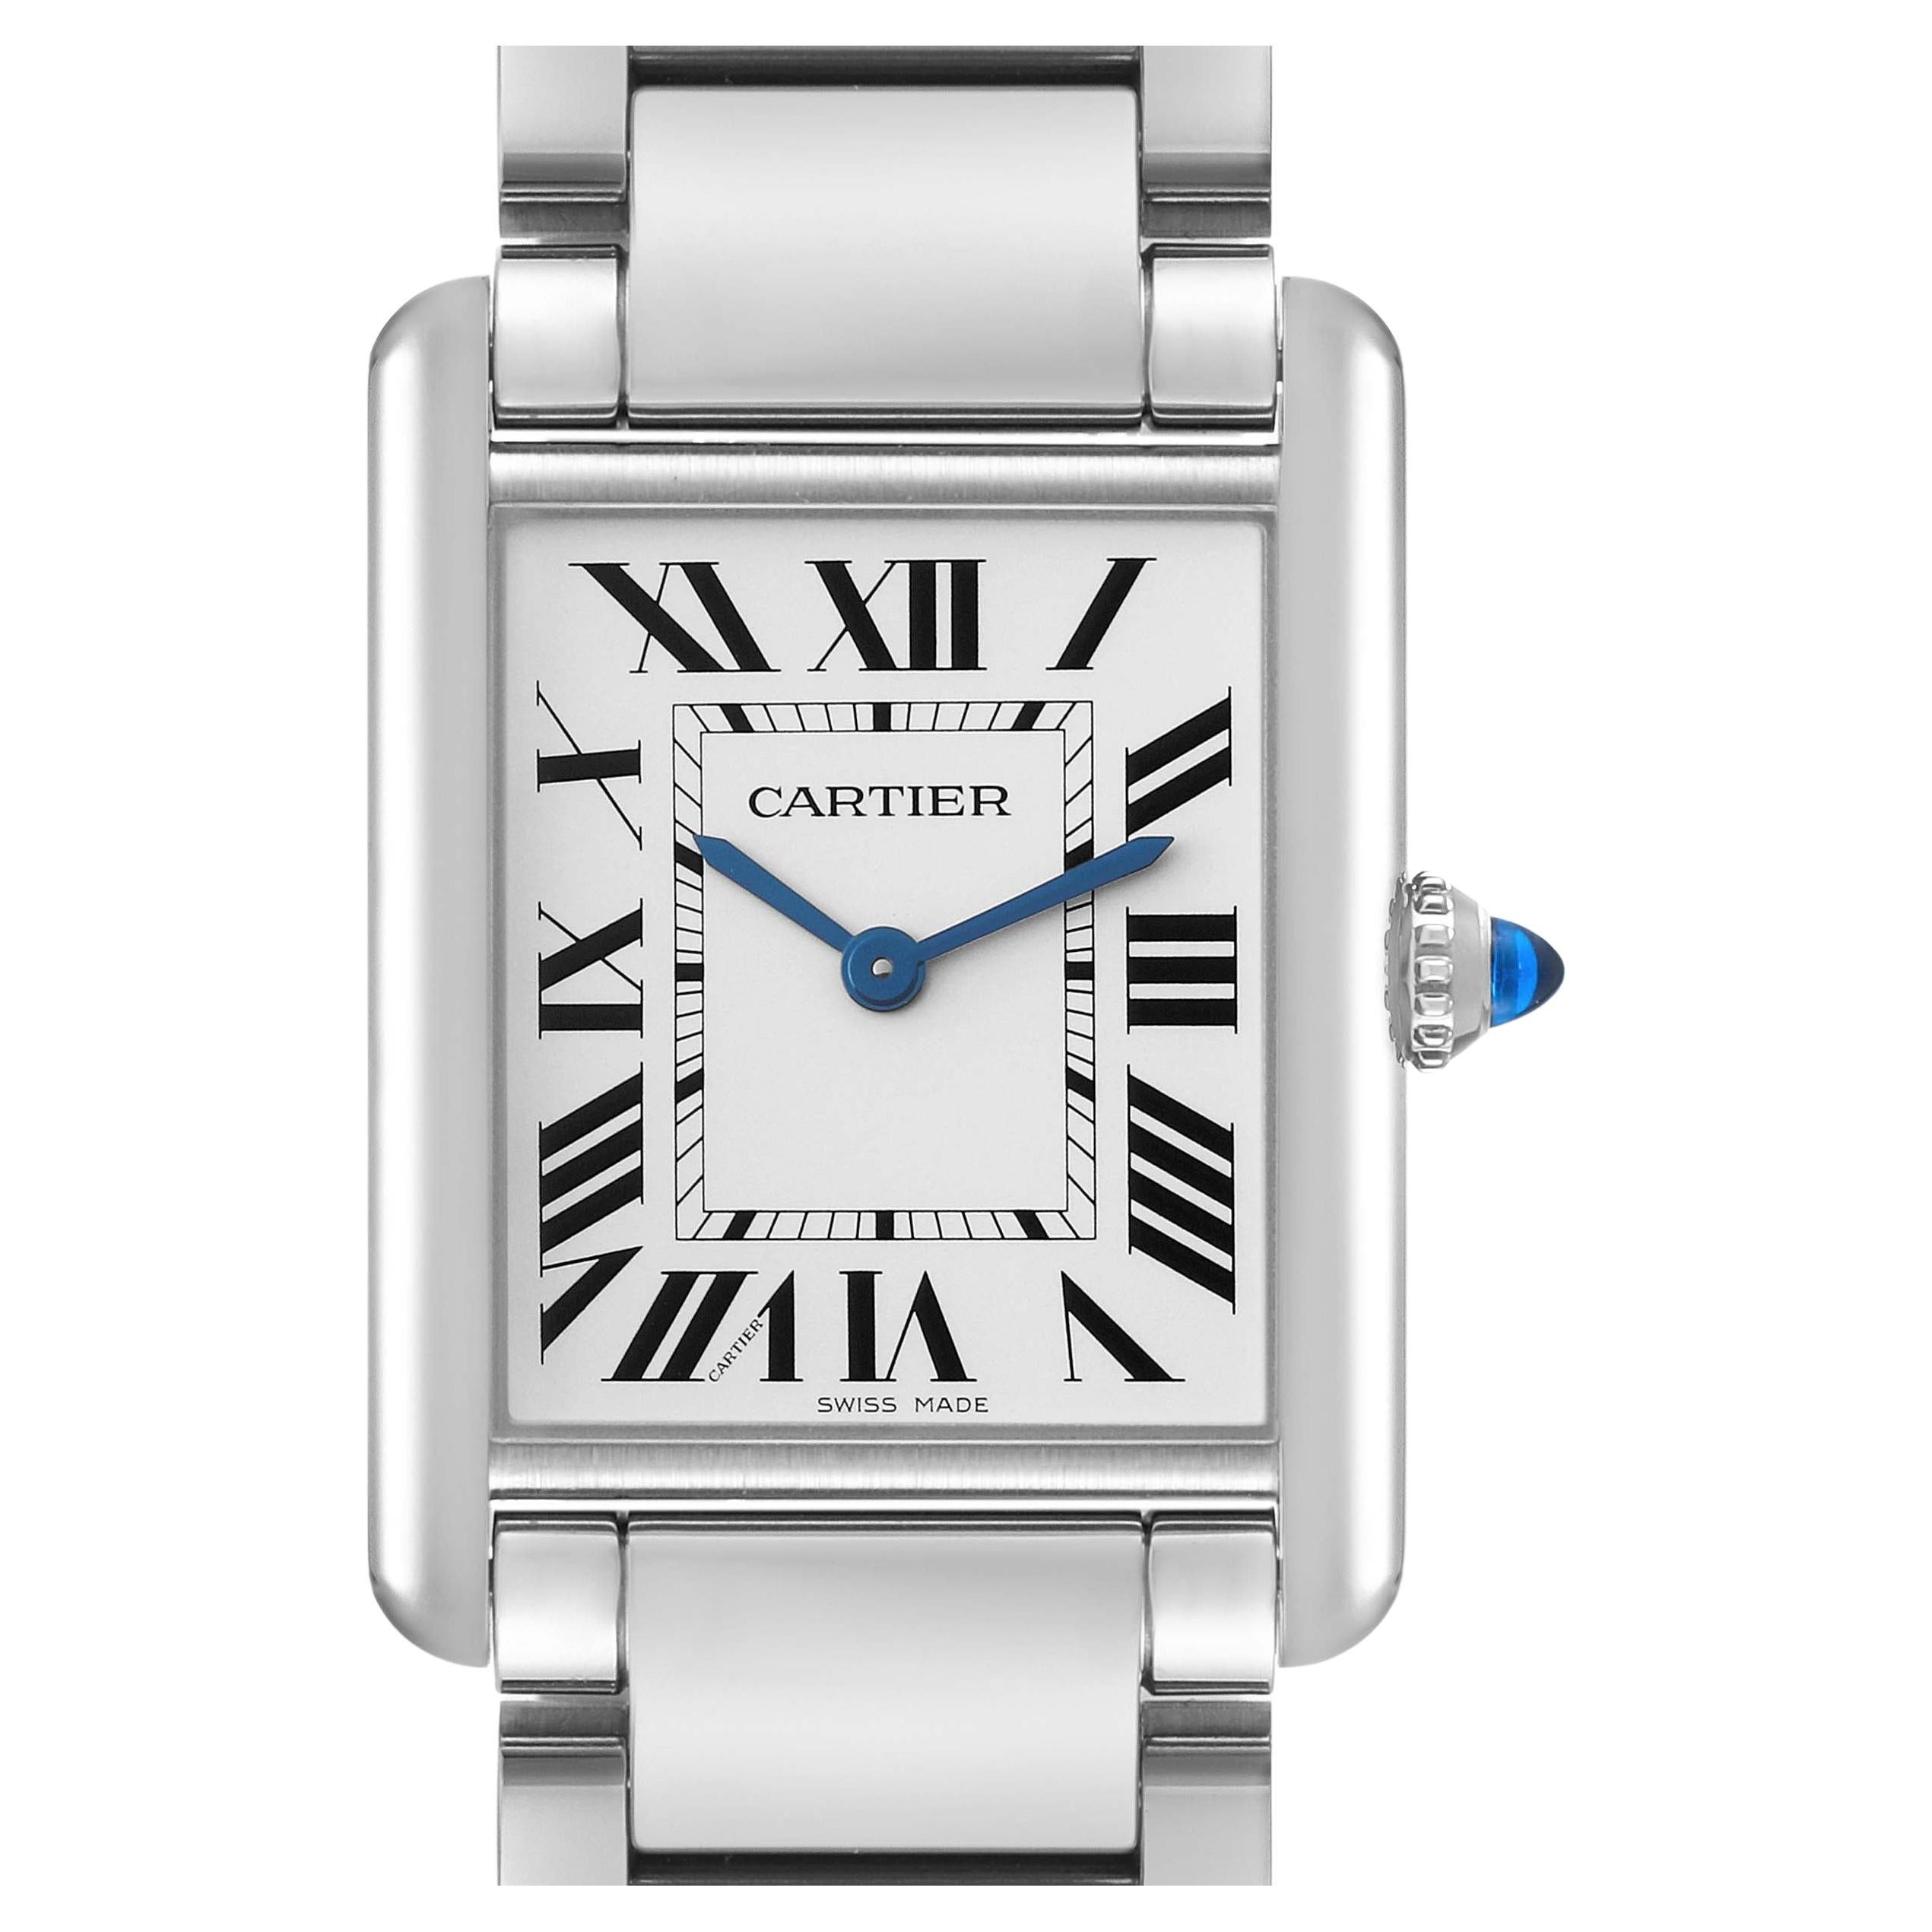 Cartier Tank Must De Cartier 1616 Silver 925 YEARS '90s Ladies for  $2,446 for sale from a Trusted Seller on Chrono24